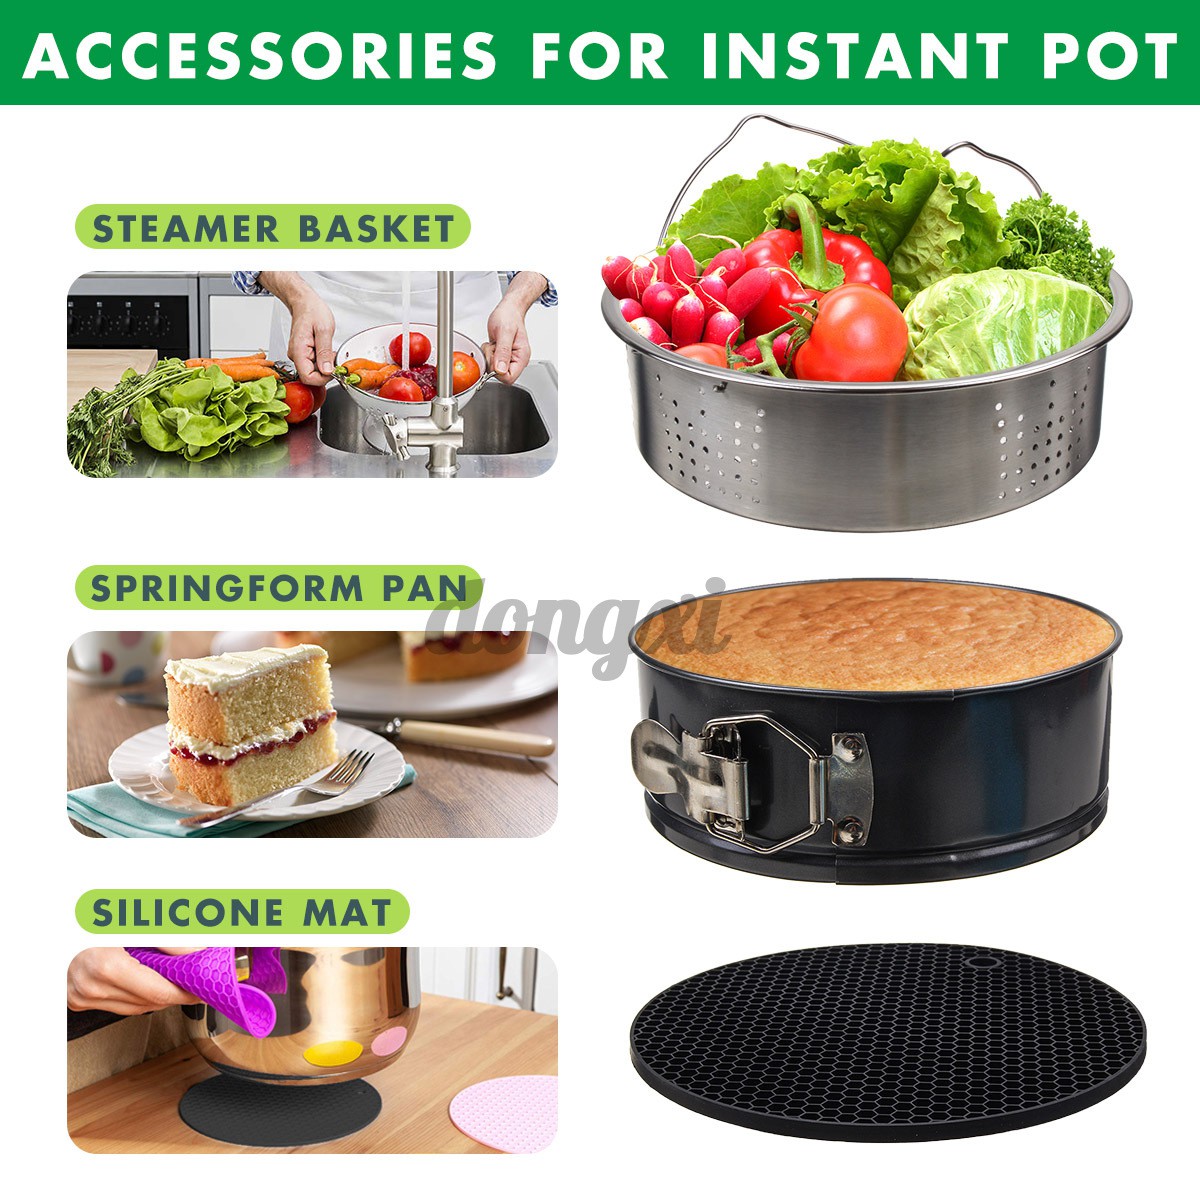 Accessories for Instant Pot 3-piece set of Instant Pot electric pressure cooker accessories